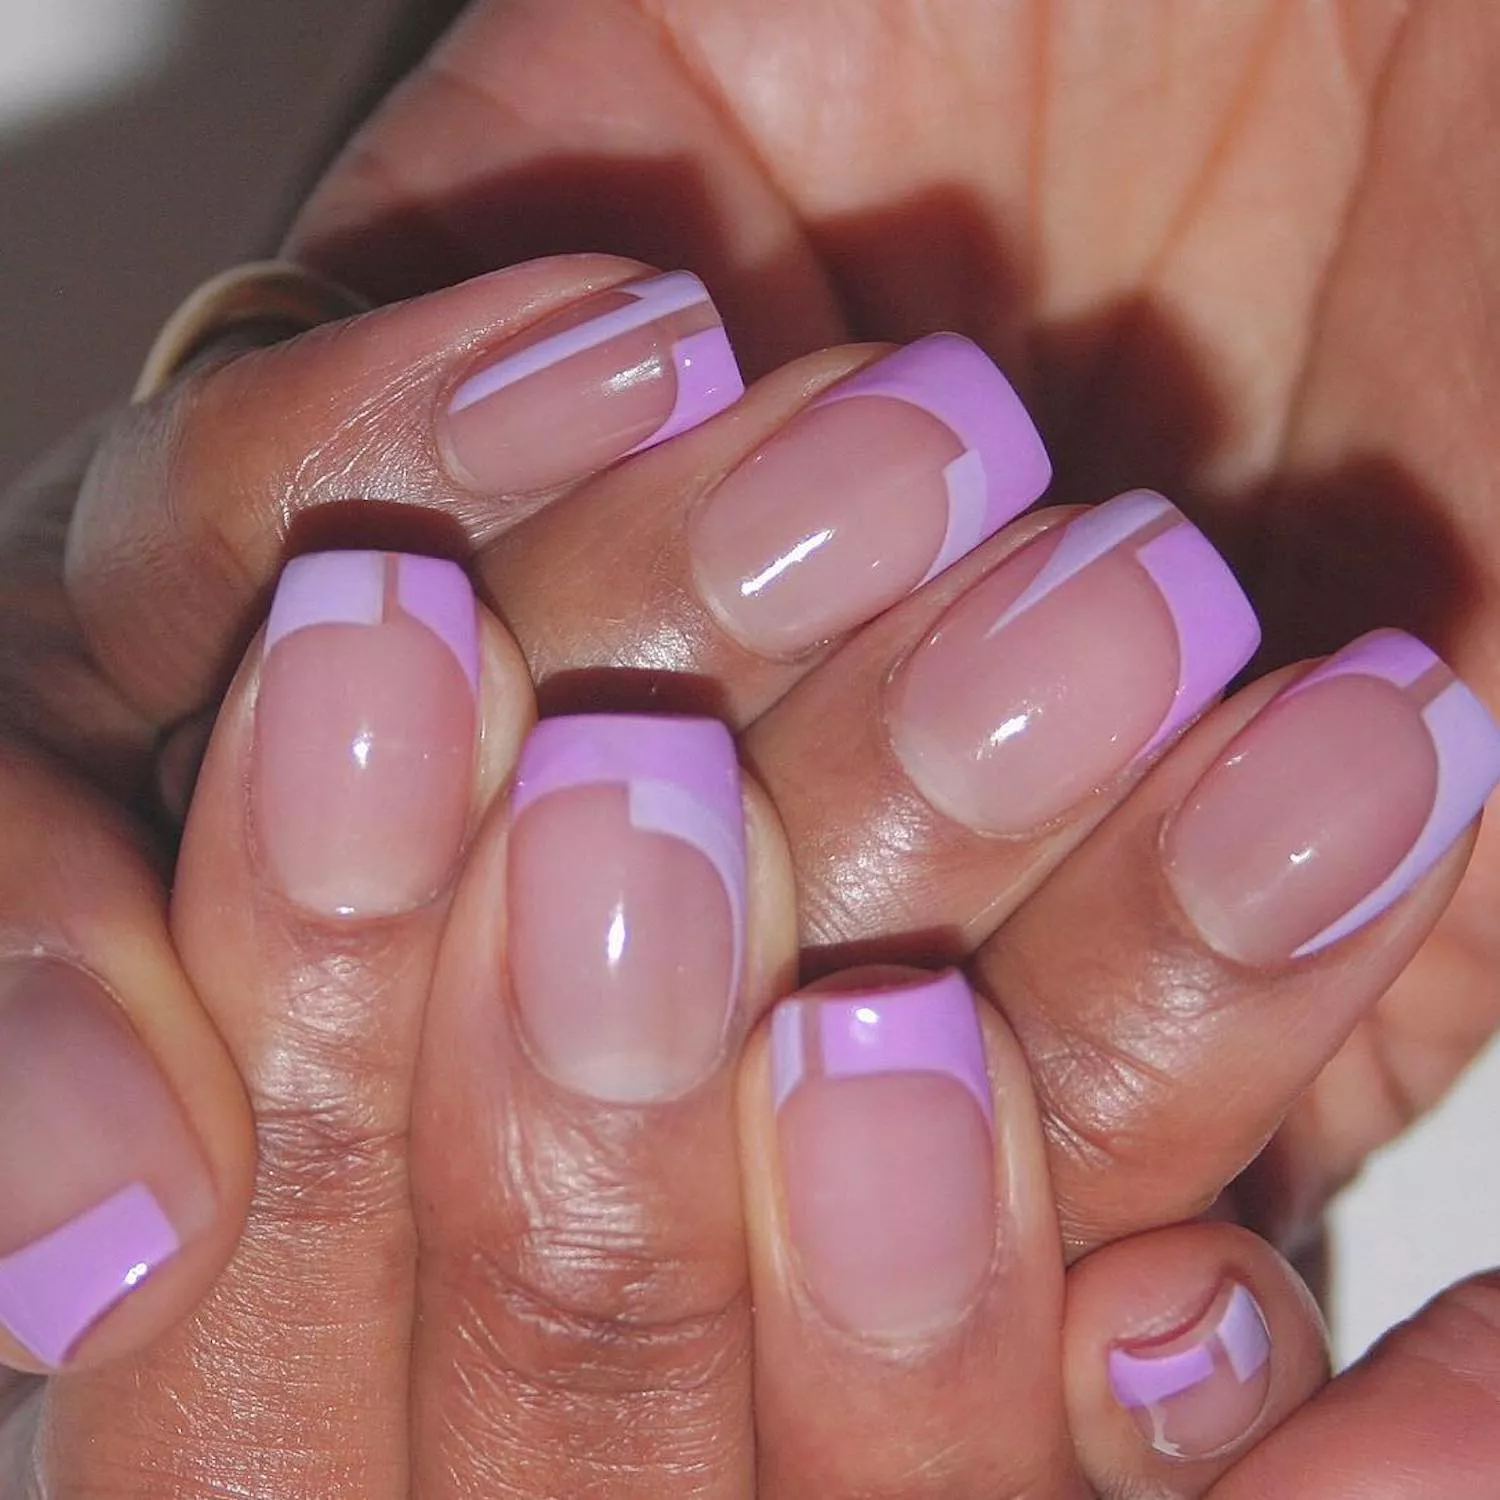 Manicure with lilac and lavender color blocked abstract French tips